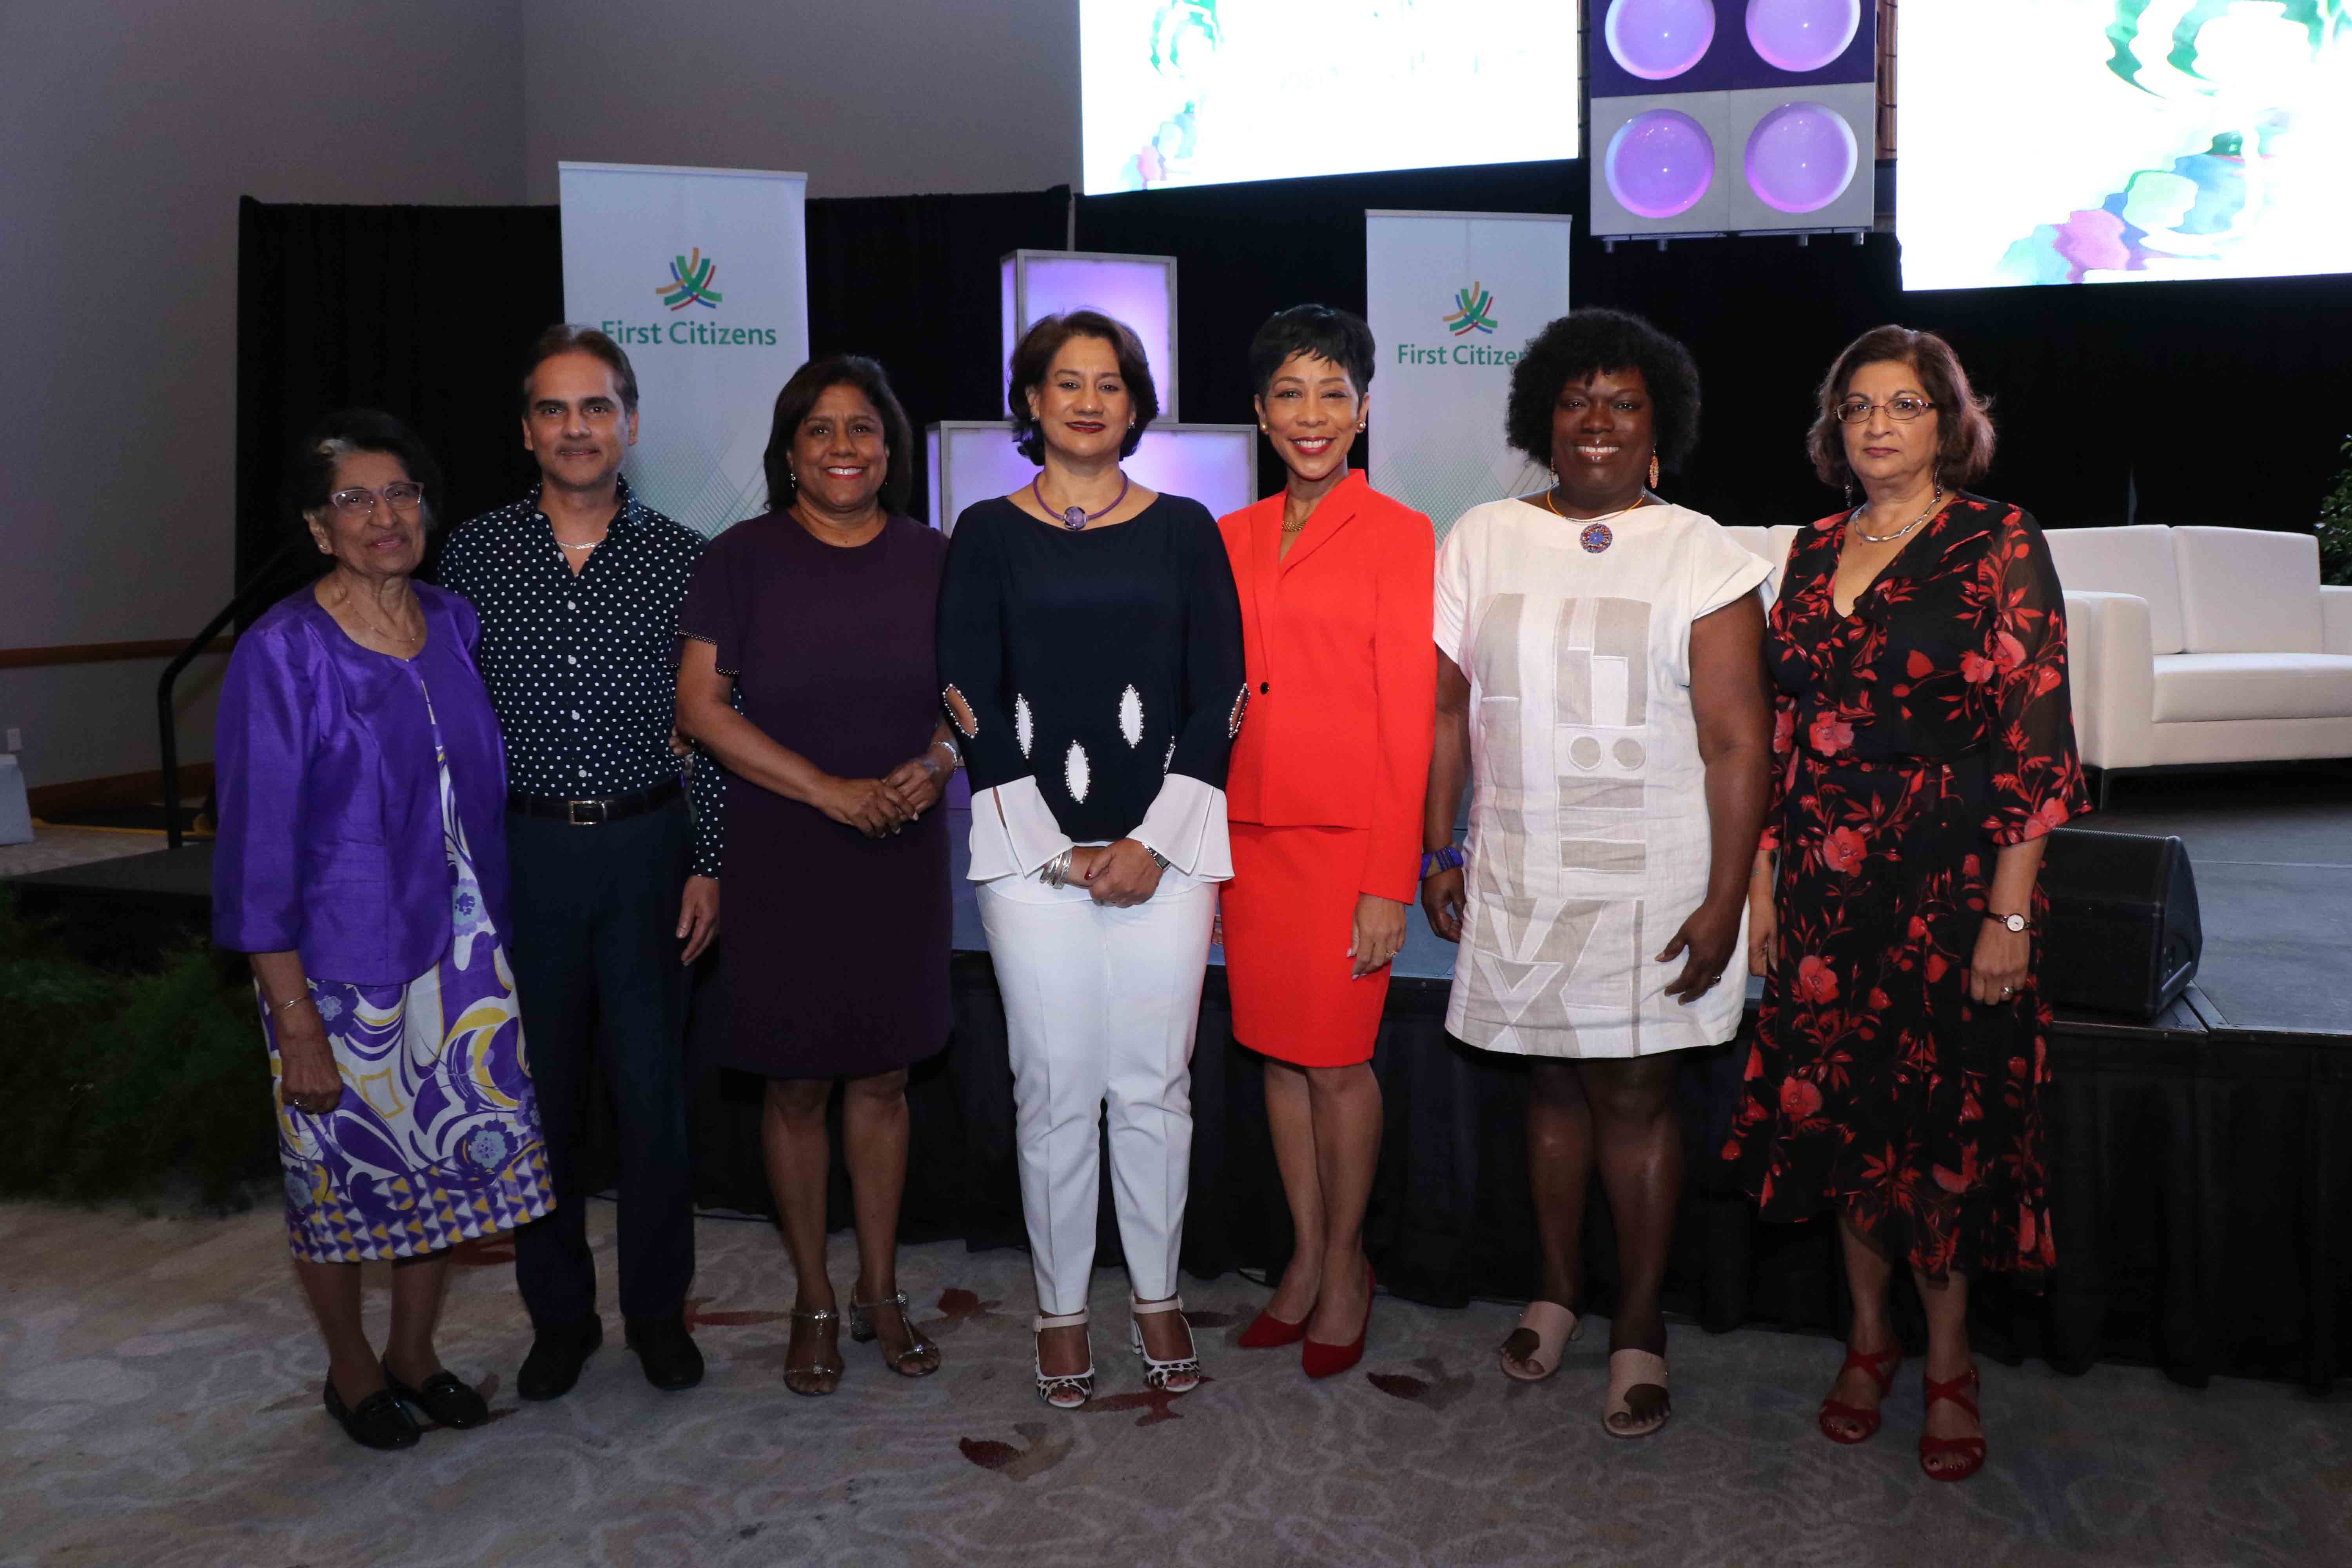 Zalayhar Hassanali, Former First Lady; Professor Sterling Frost, First Citizens Group Deputy CEO – Operations & Administration; Senator the Honourable Paula Gopee-Scoon, Minister of Trade and Industry; Karen Darbasie, First Citizens Group CEO; Sharon Clark-Rowley, wife of Dr. the Honourable Keith Rowley and Attorney-at-Law; Her Honour Deborah Thomas-Felix, President of the Industrial Court; and Emerita Professor Patricia Mohammed at the annual First Citizens Women First Conference.